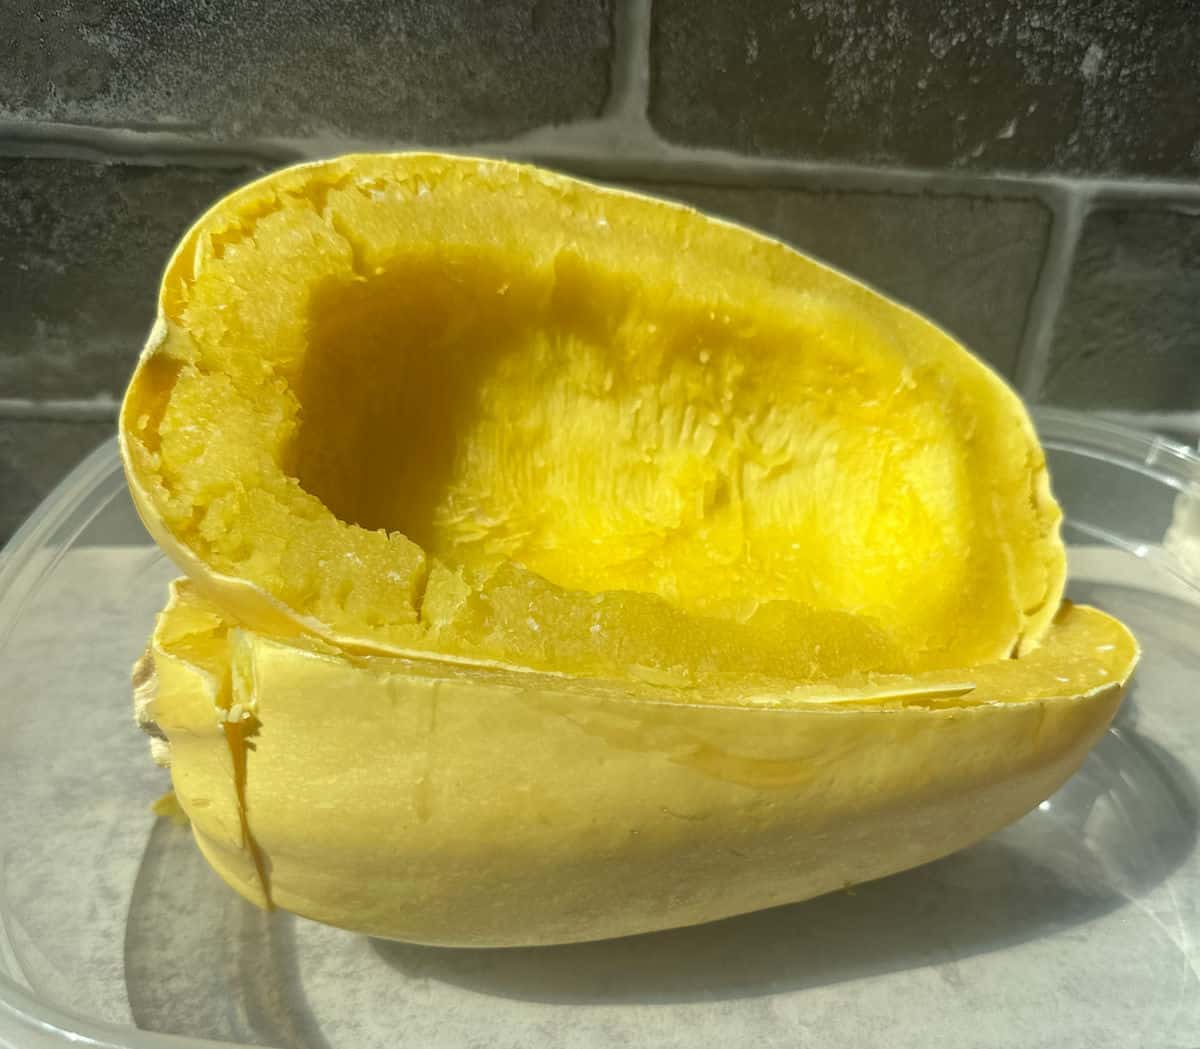 A photo of two spaghetti squash halves cooked and cooling in a clear container before being scraped.